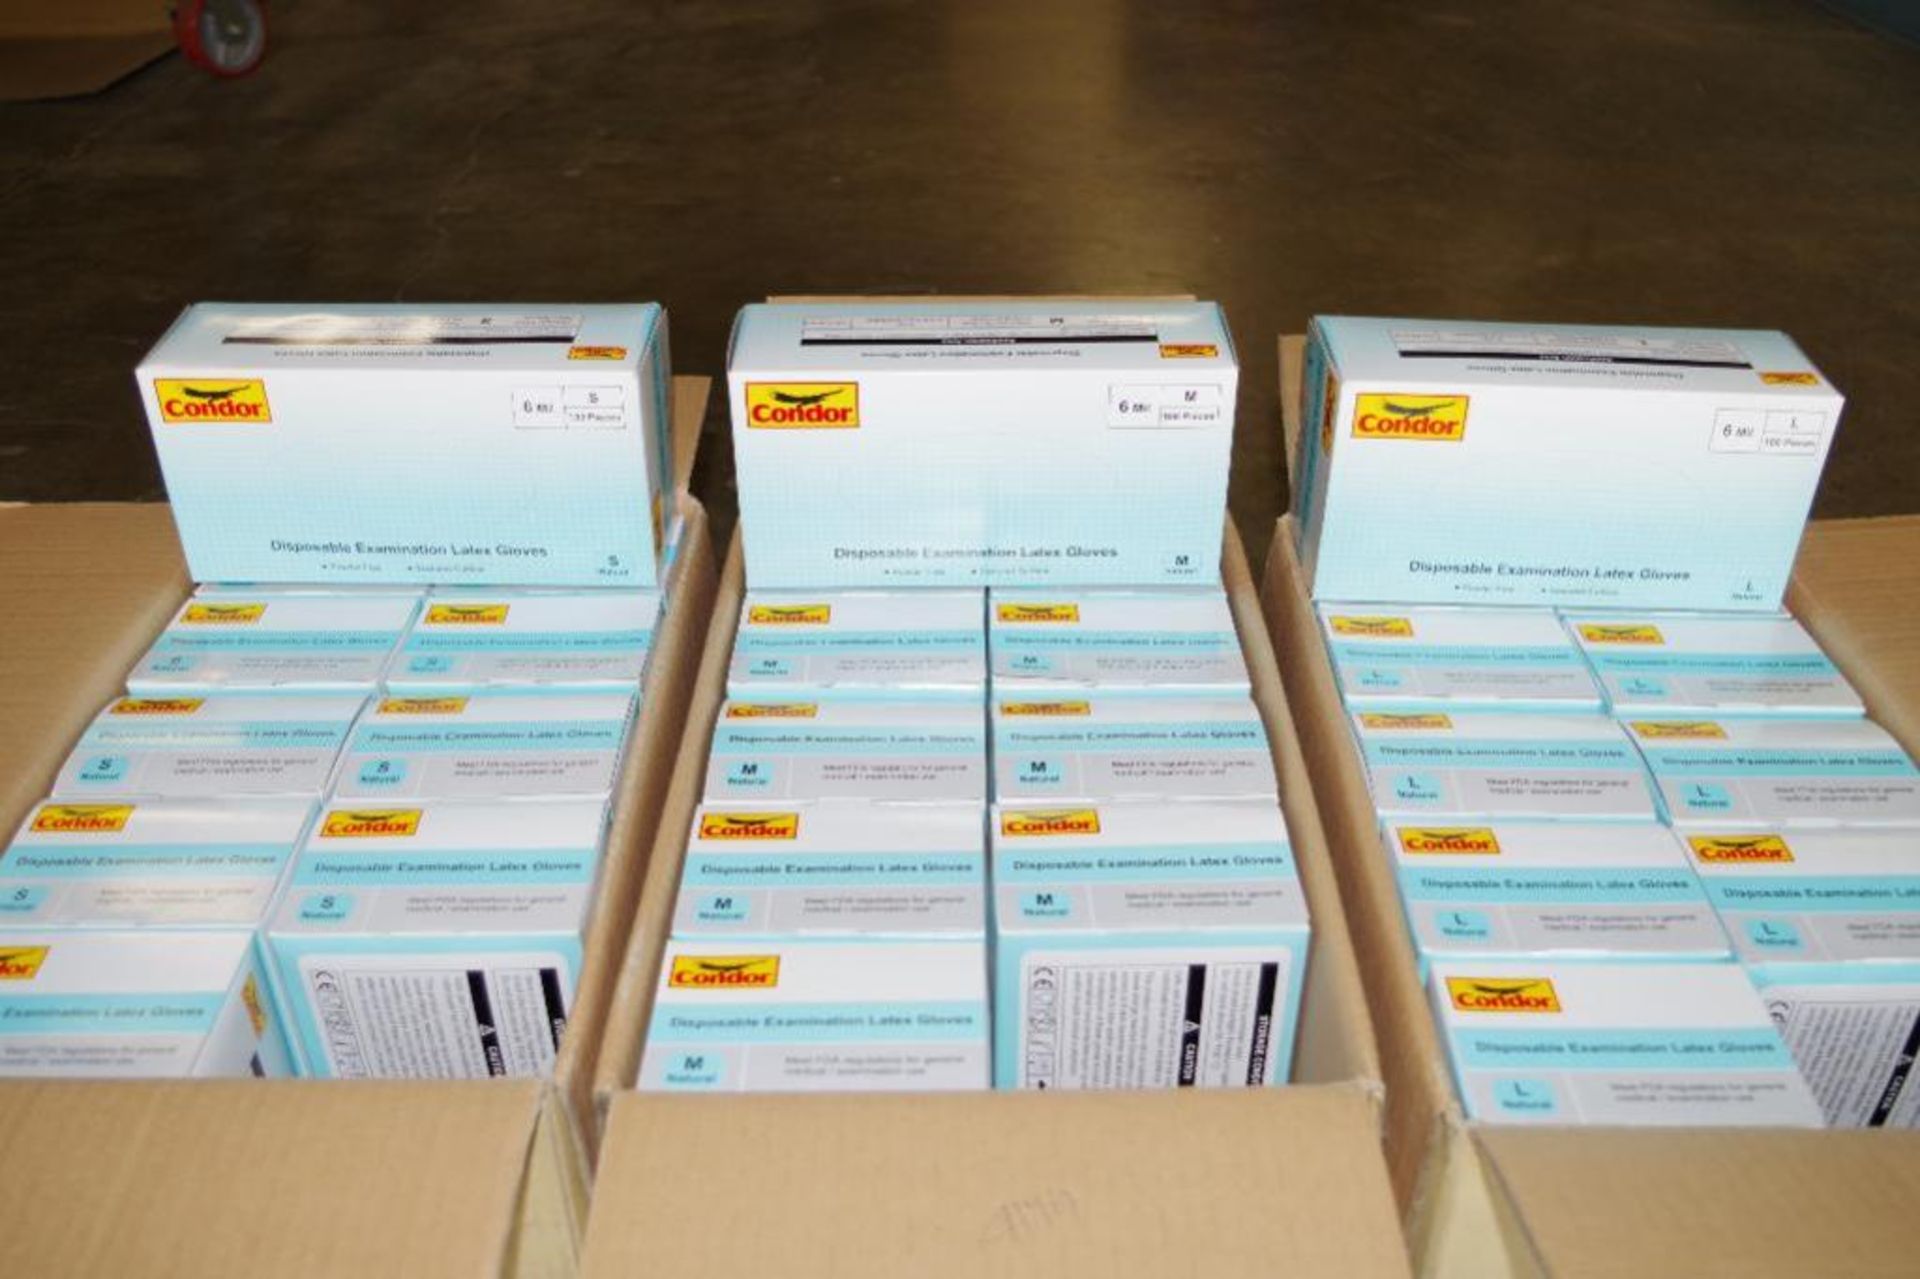 (3) Cases of CONDOR Disposable Examination Latex Gloves Sizes, S, M & L (3 Cases of 1000)